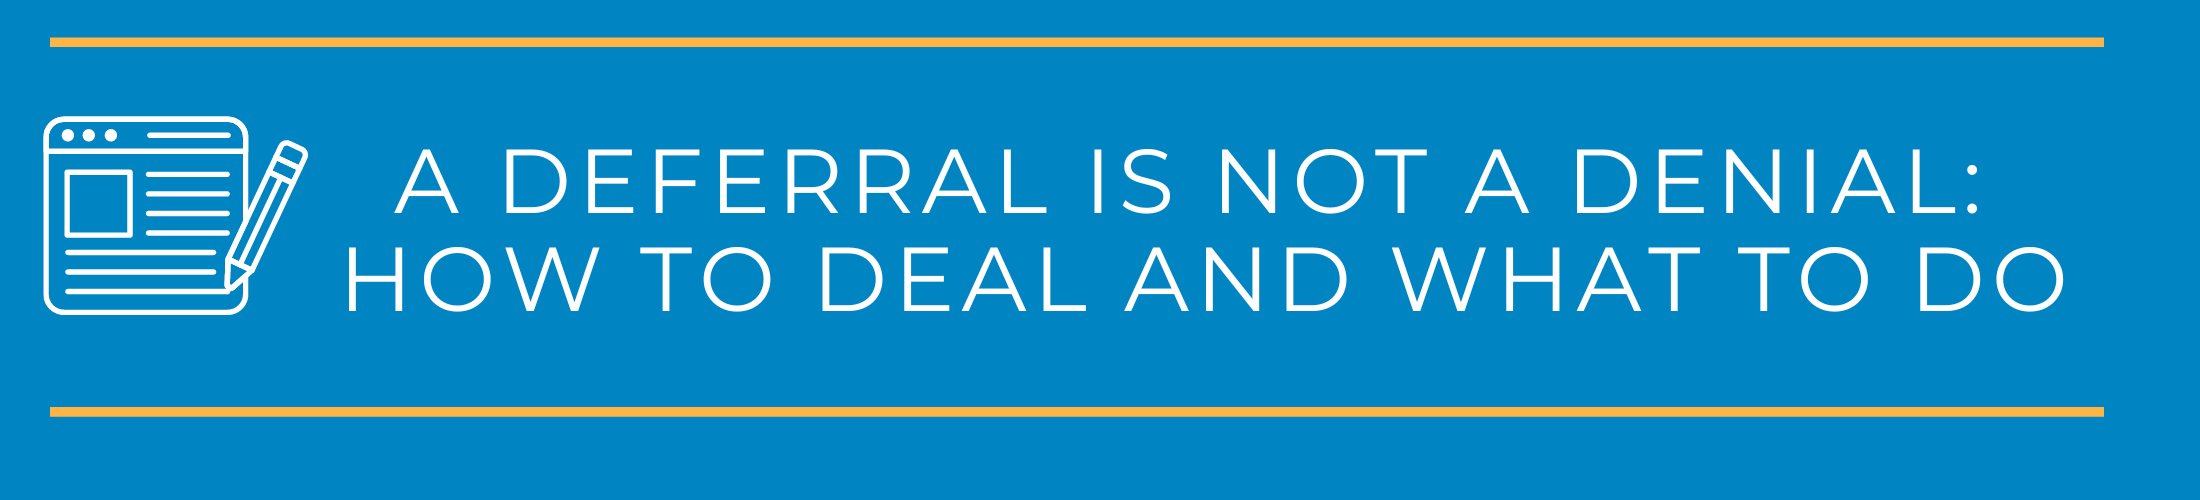 A Deferral is Not a Denial: How to Deal and What to Do